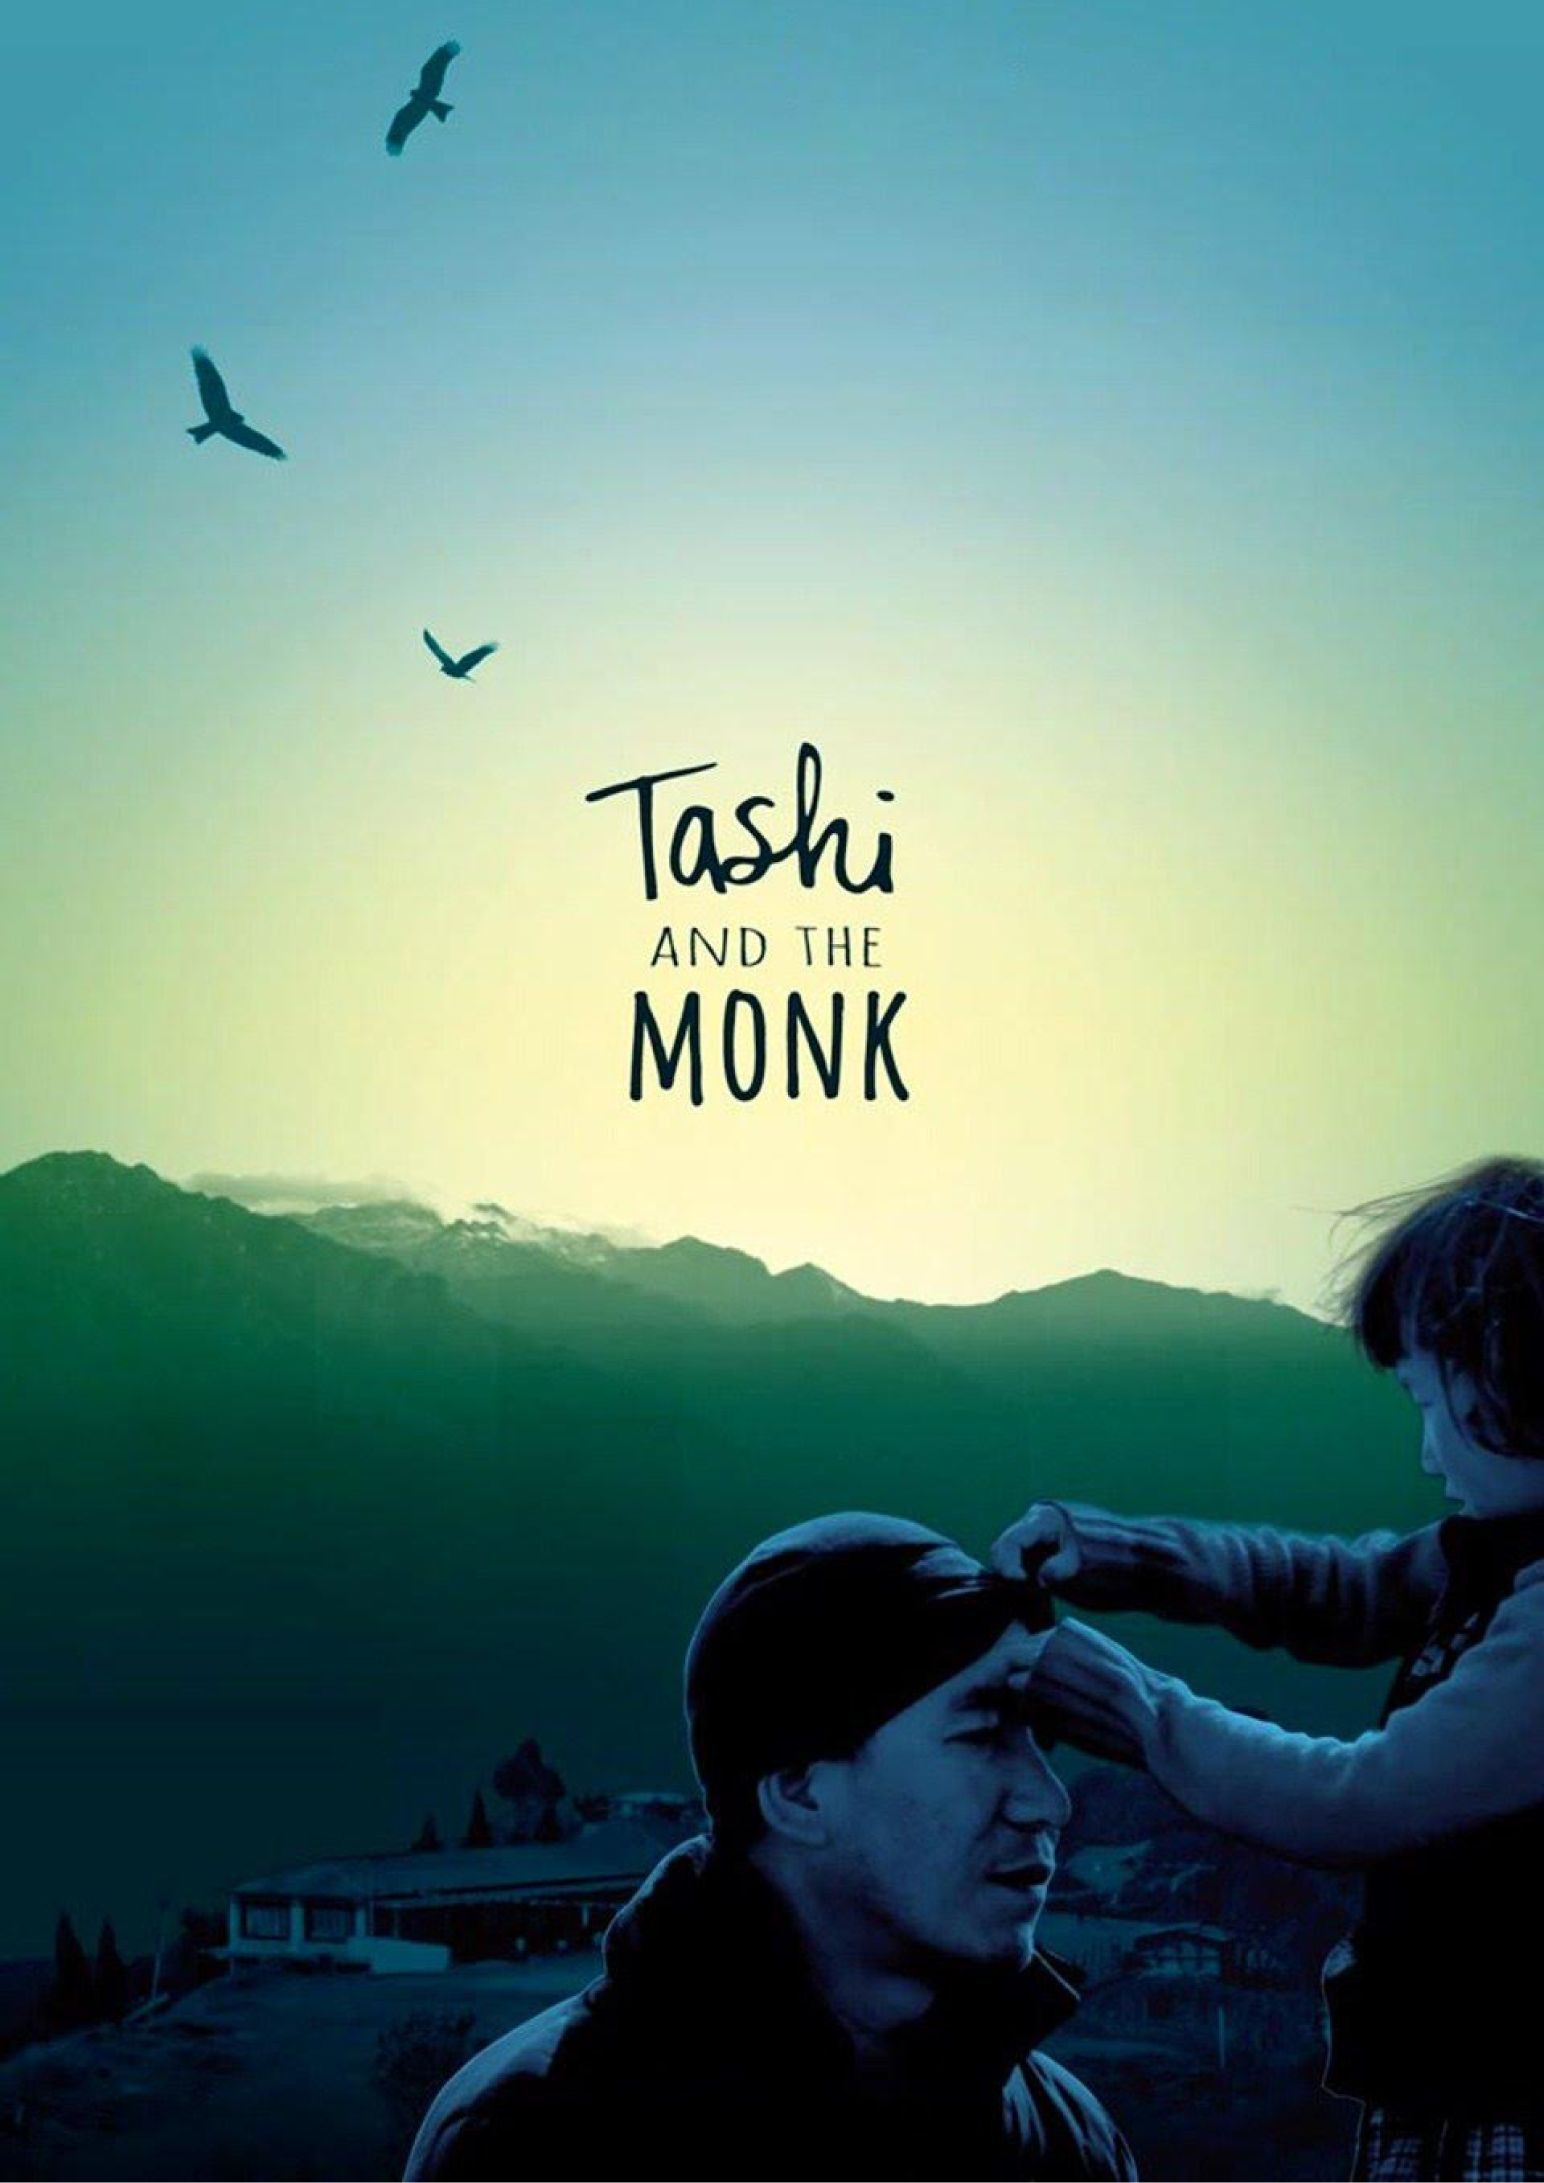 Tashi and the Monk